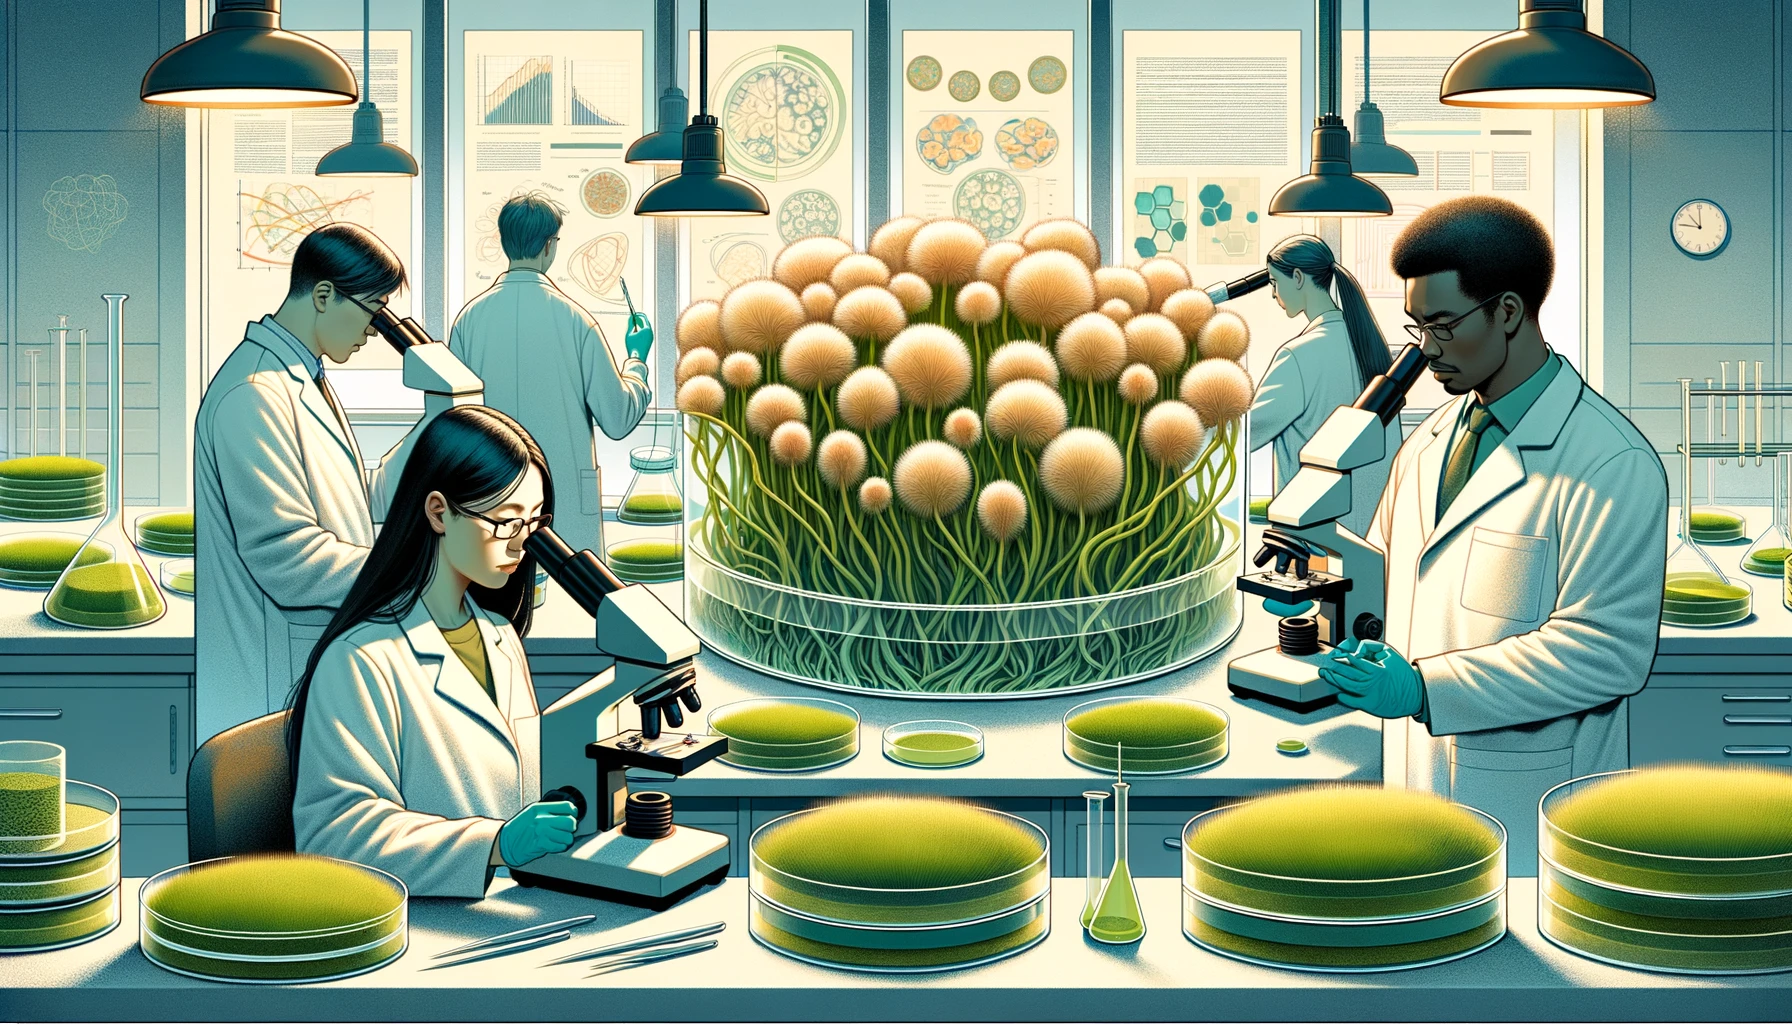 Illustration of a lab with scientists using microscopes and conducting research. A large Petri dish with dandelion-like structures is the focal point, surrounded by beakers, charts, and other lab equipment.